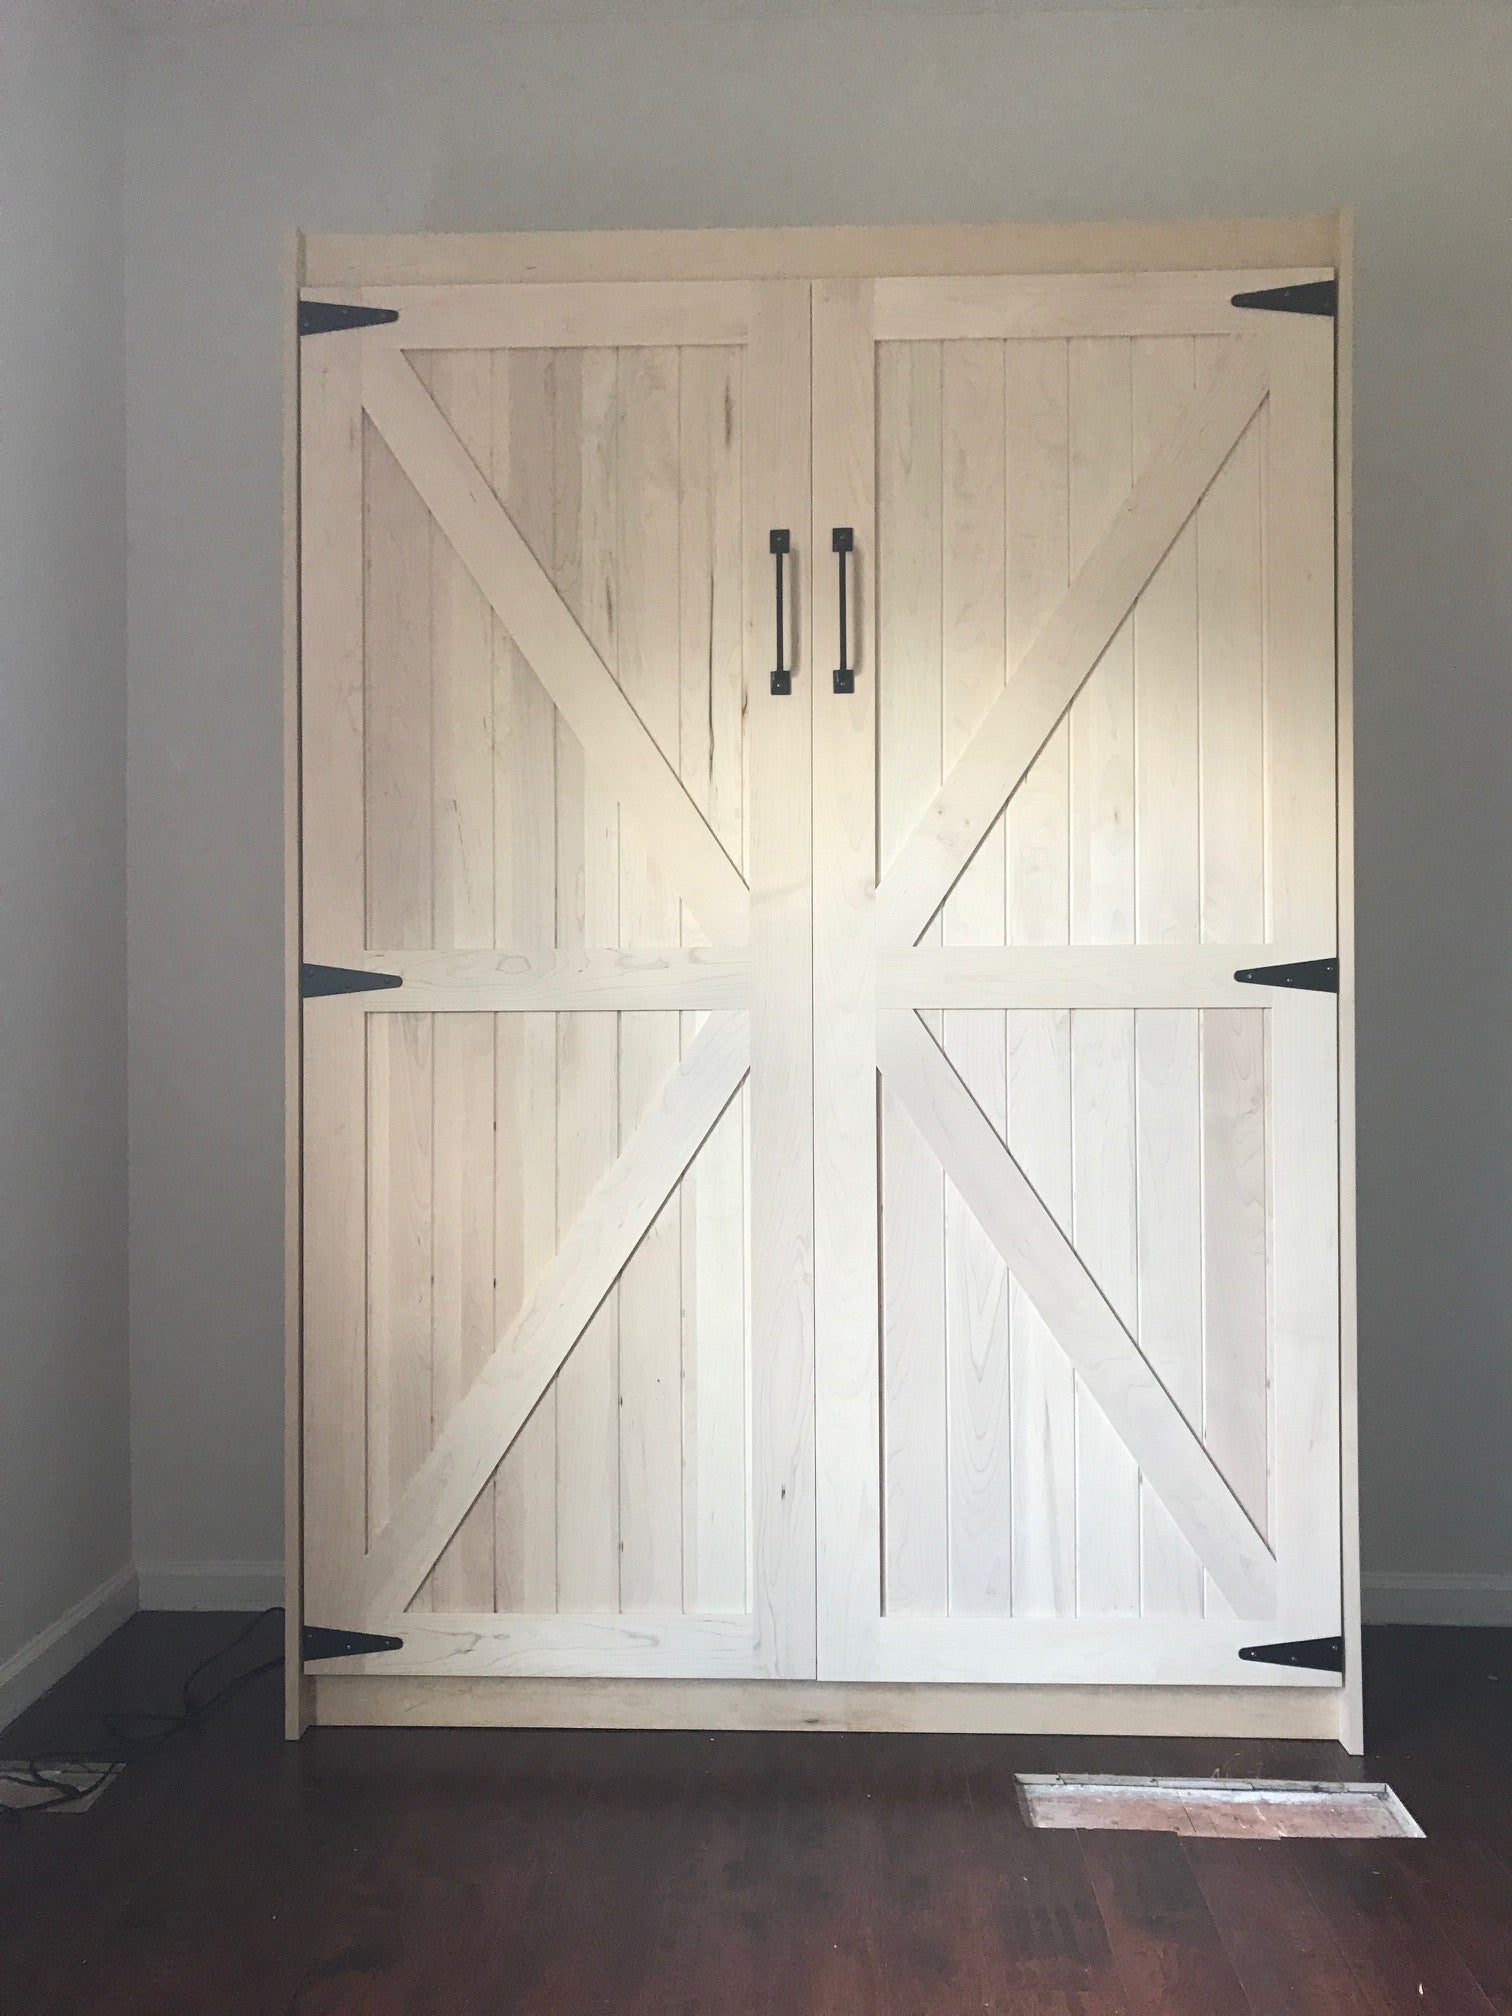 The Barn Door Panel Bed C in color white, front view